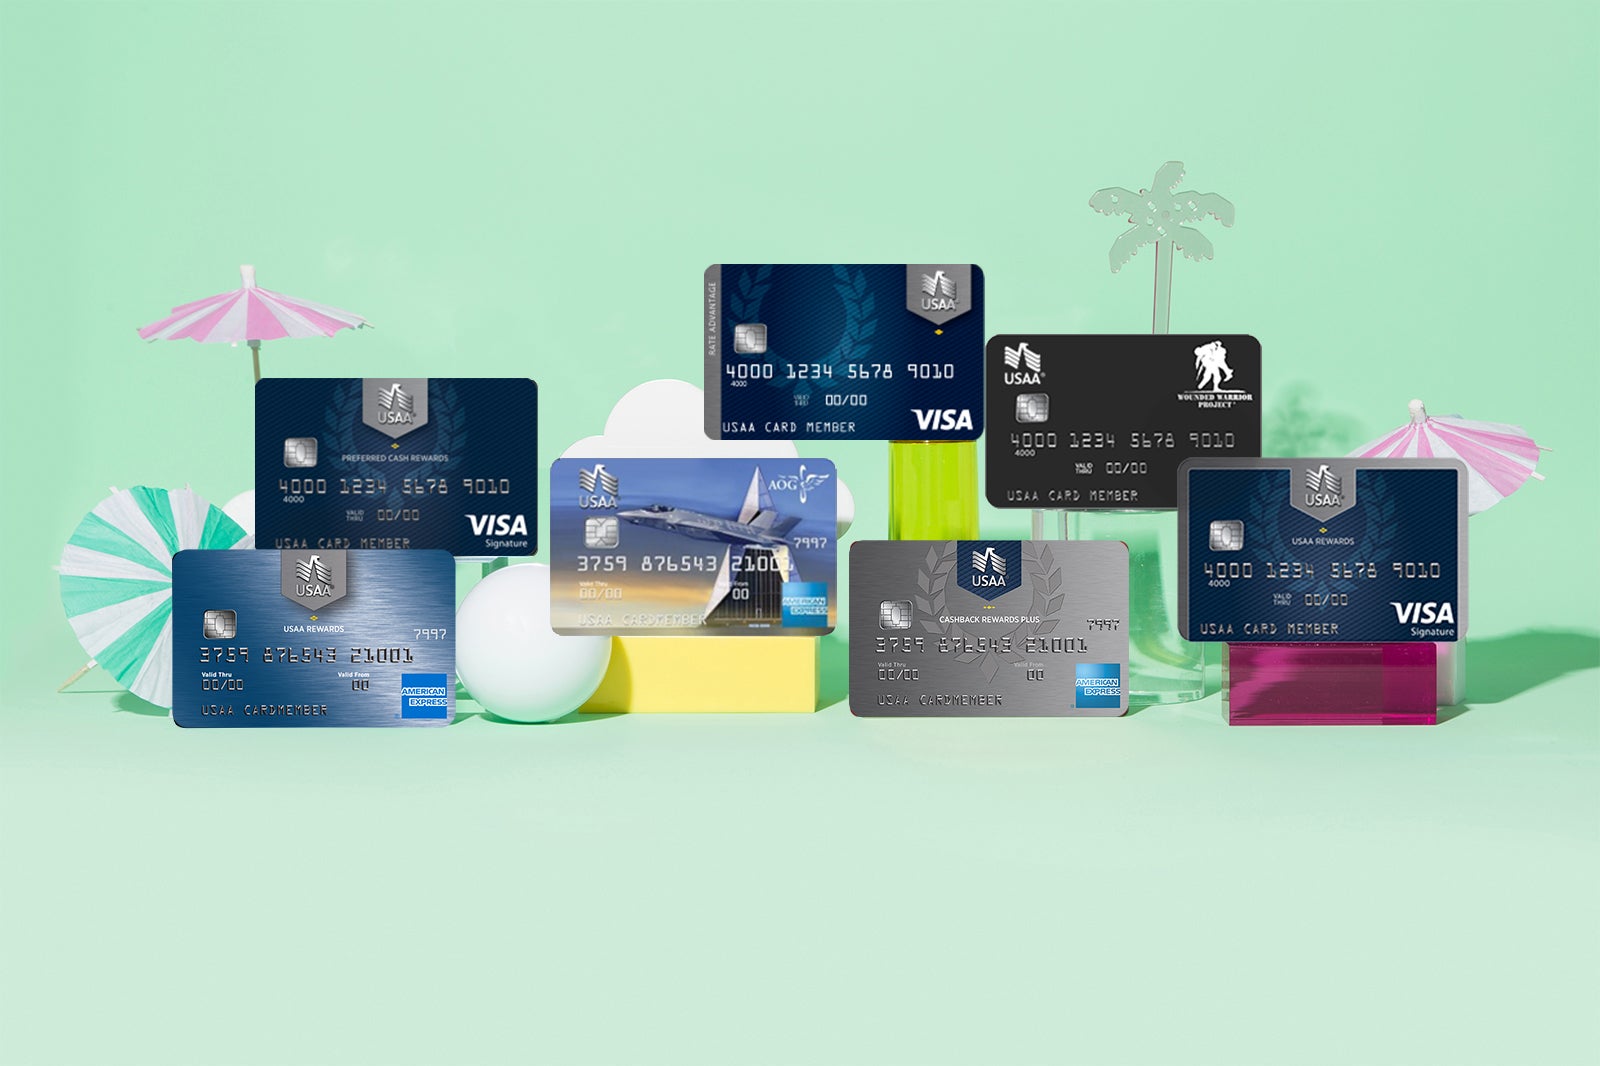 usaa ach credit and debit